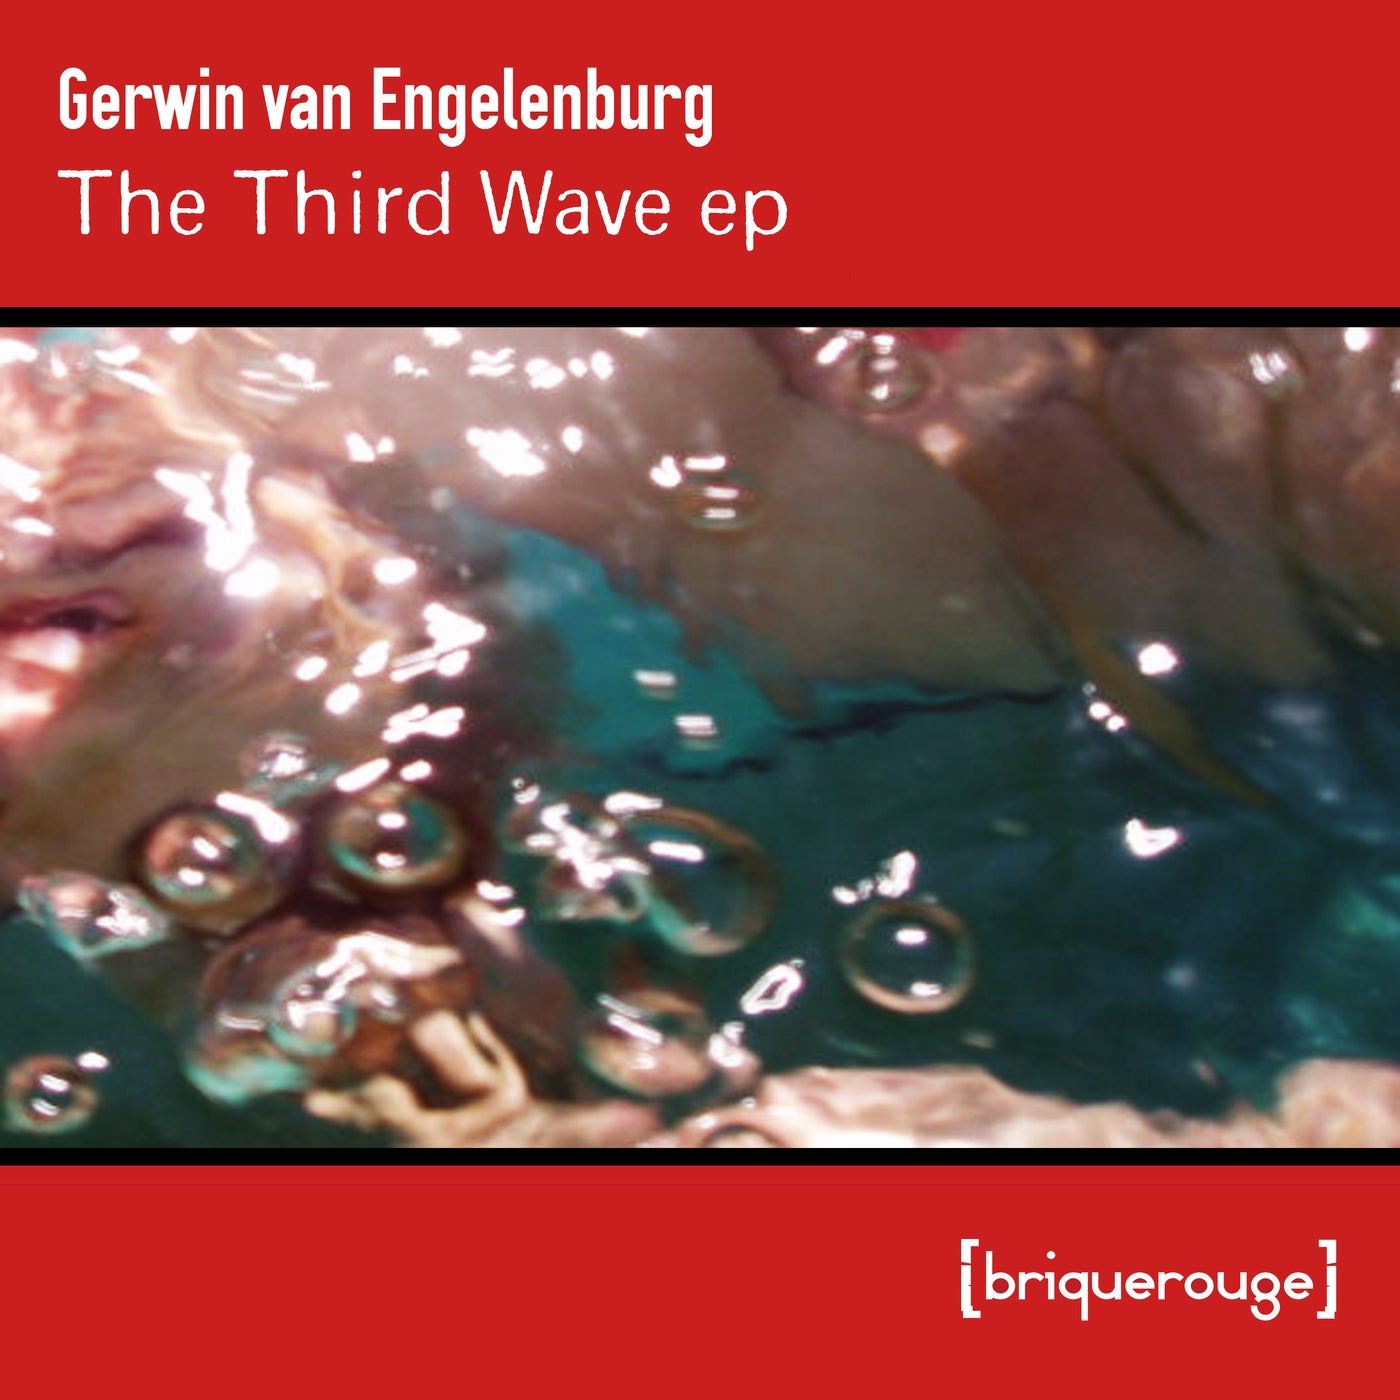 The Third Wave EP